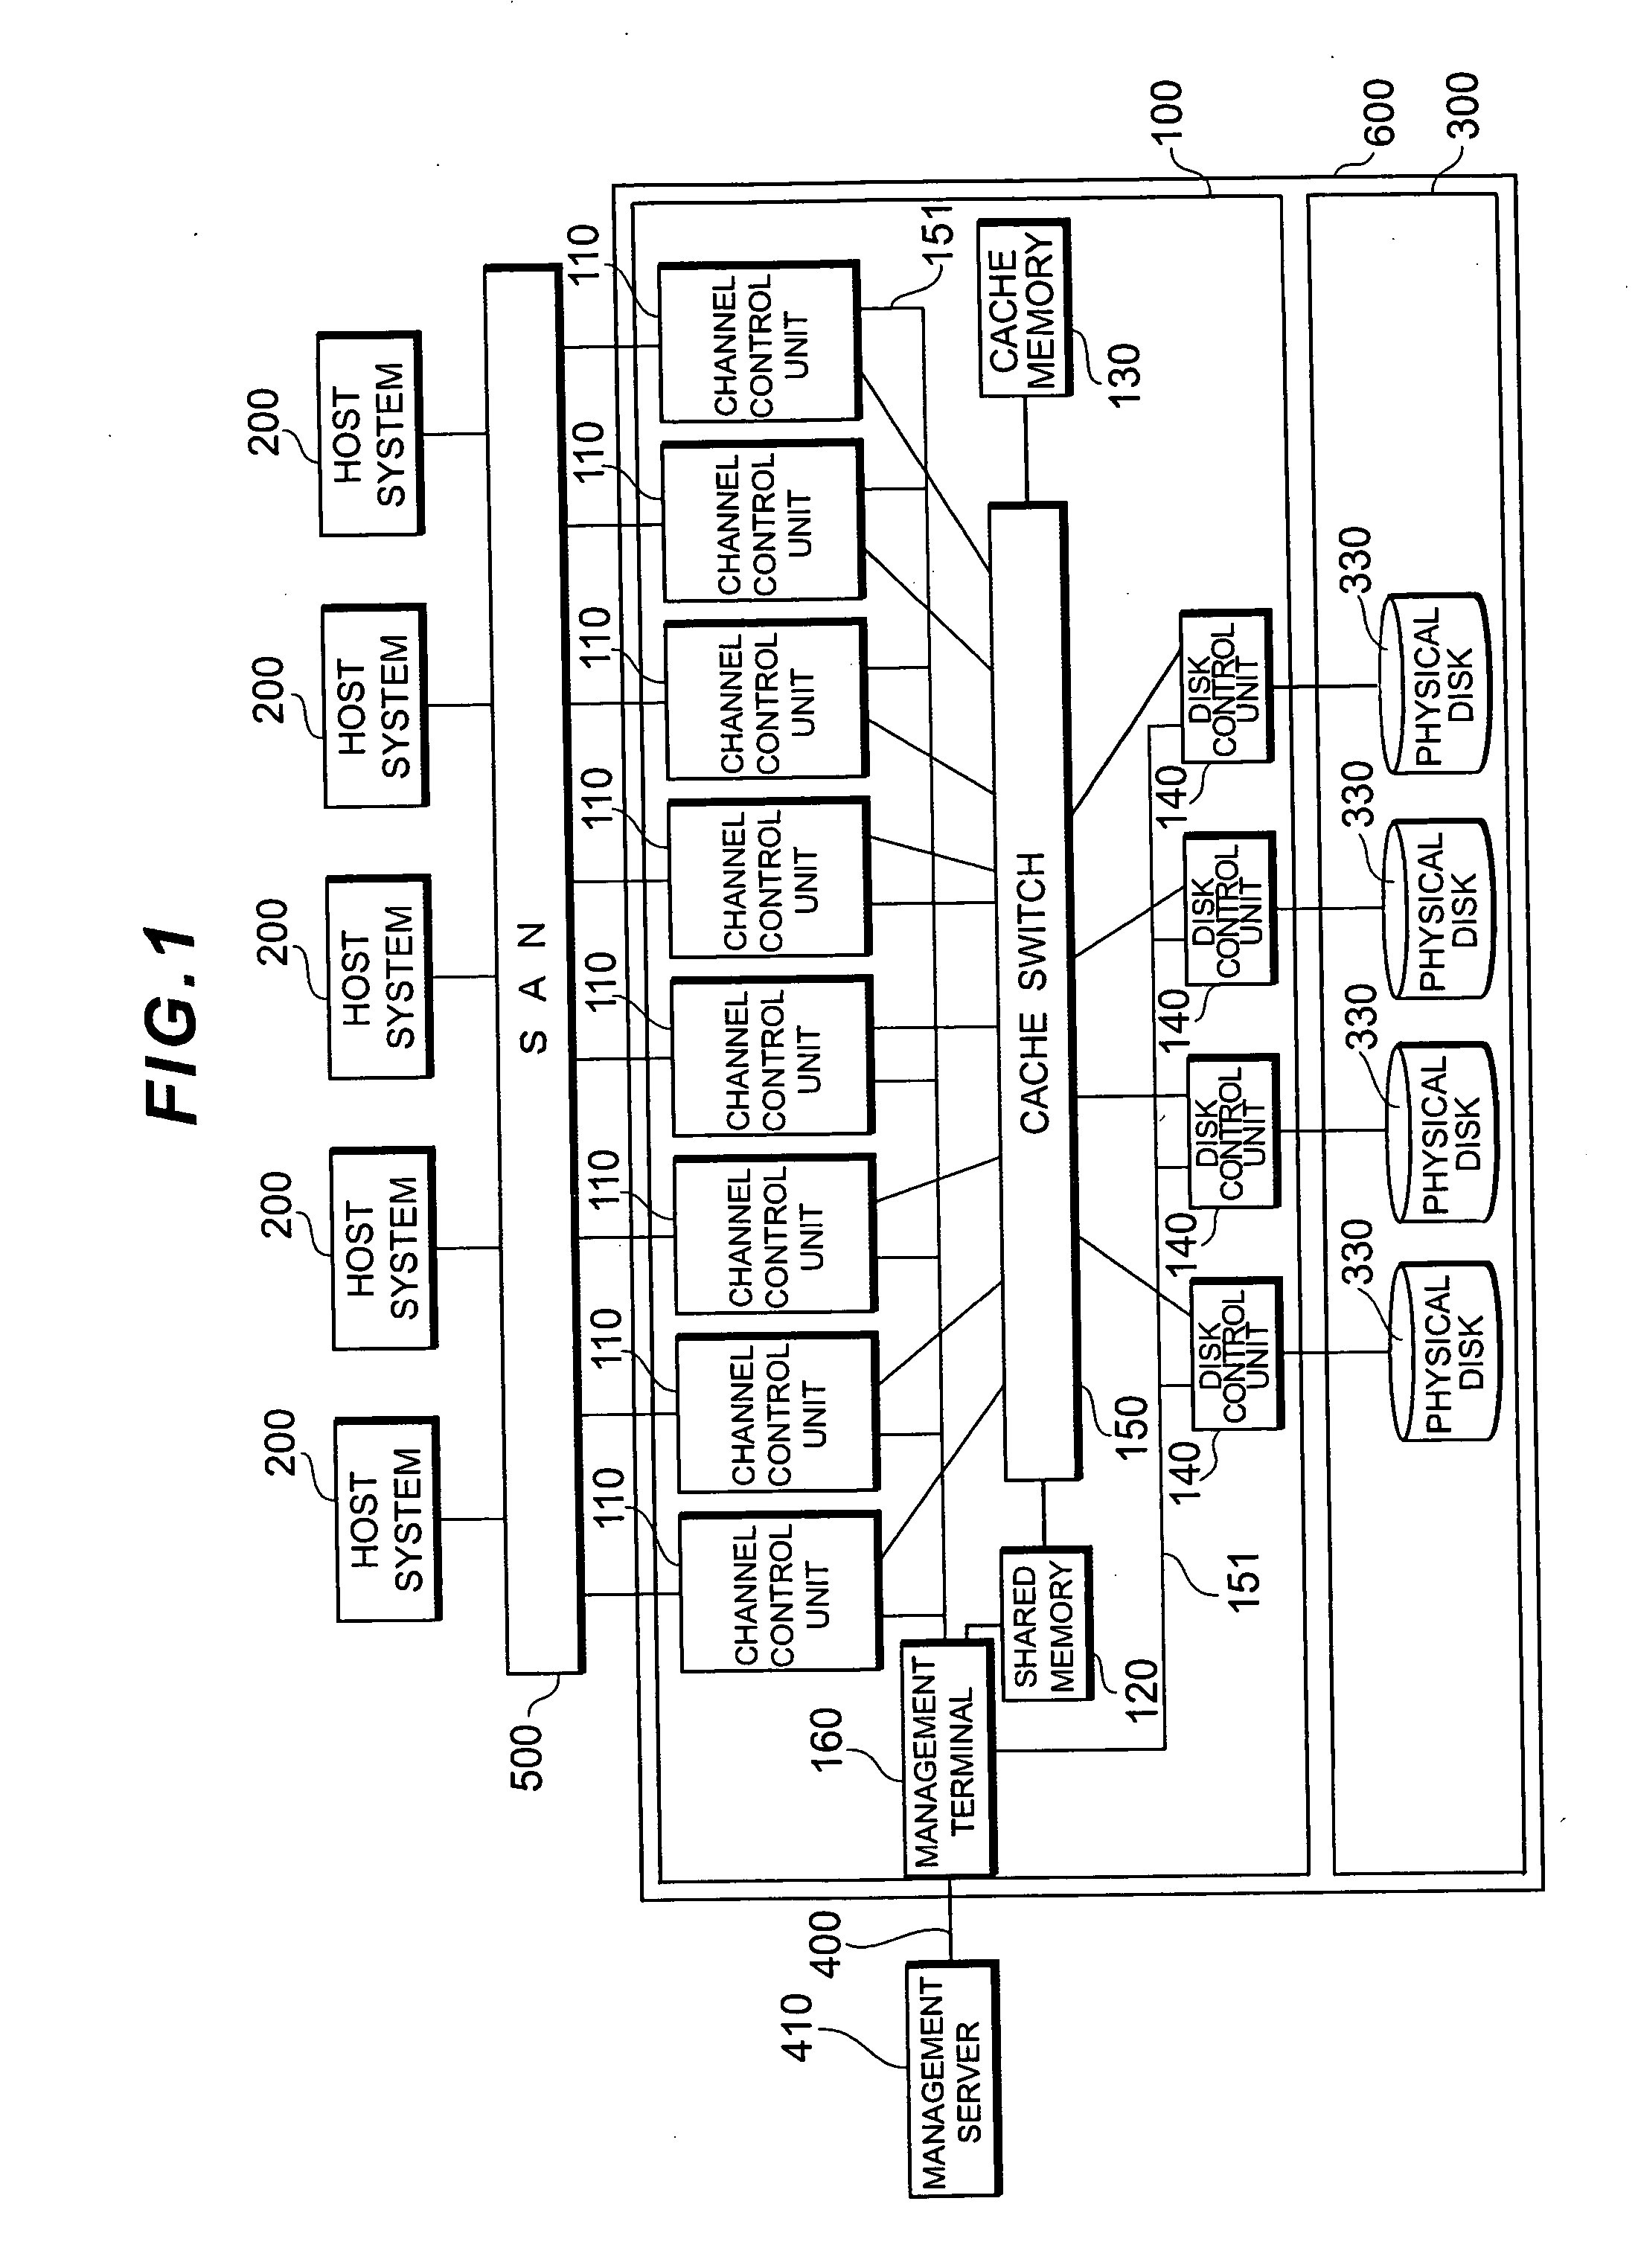 Storage controller, data processing method and computer program product